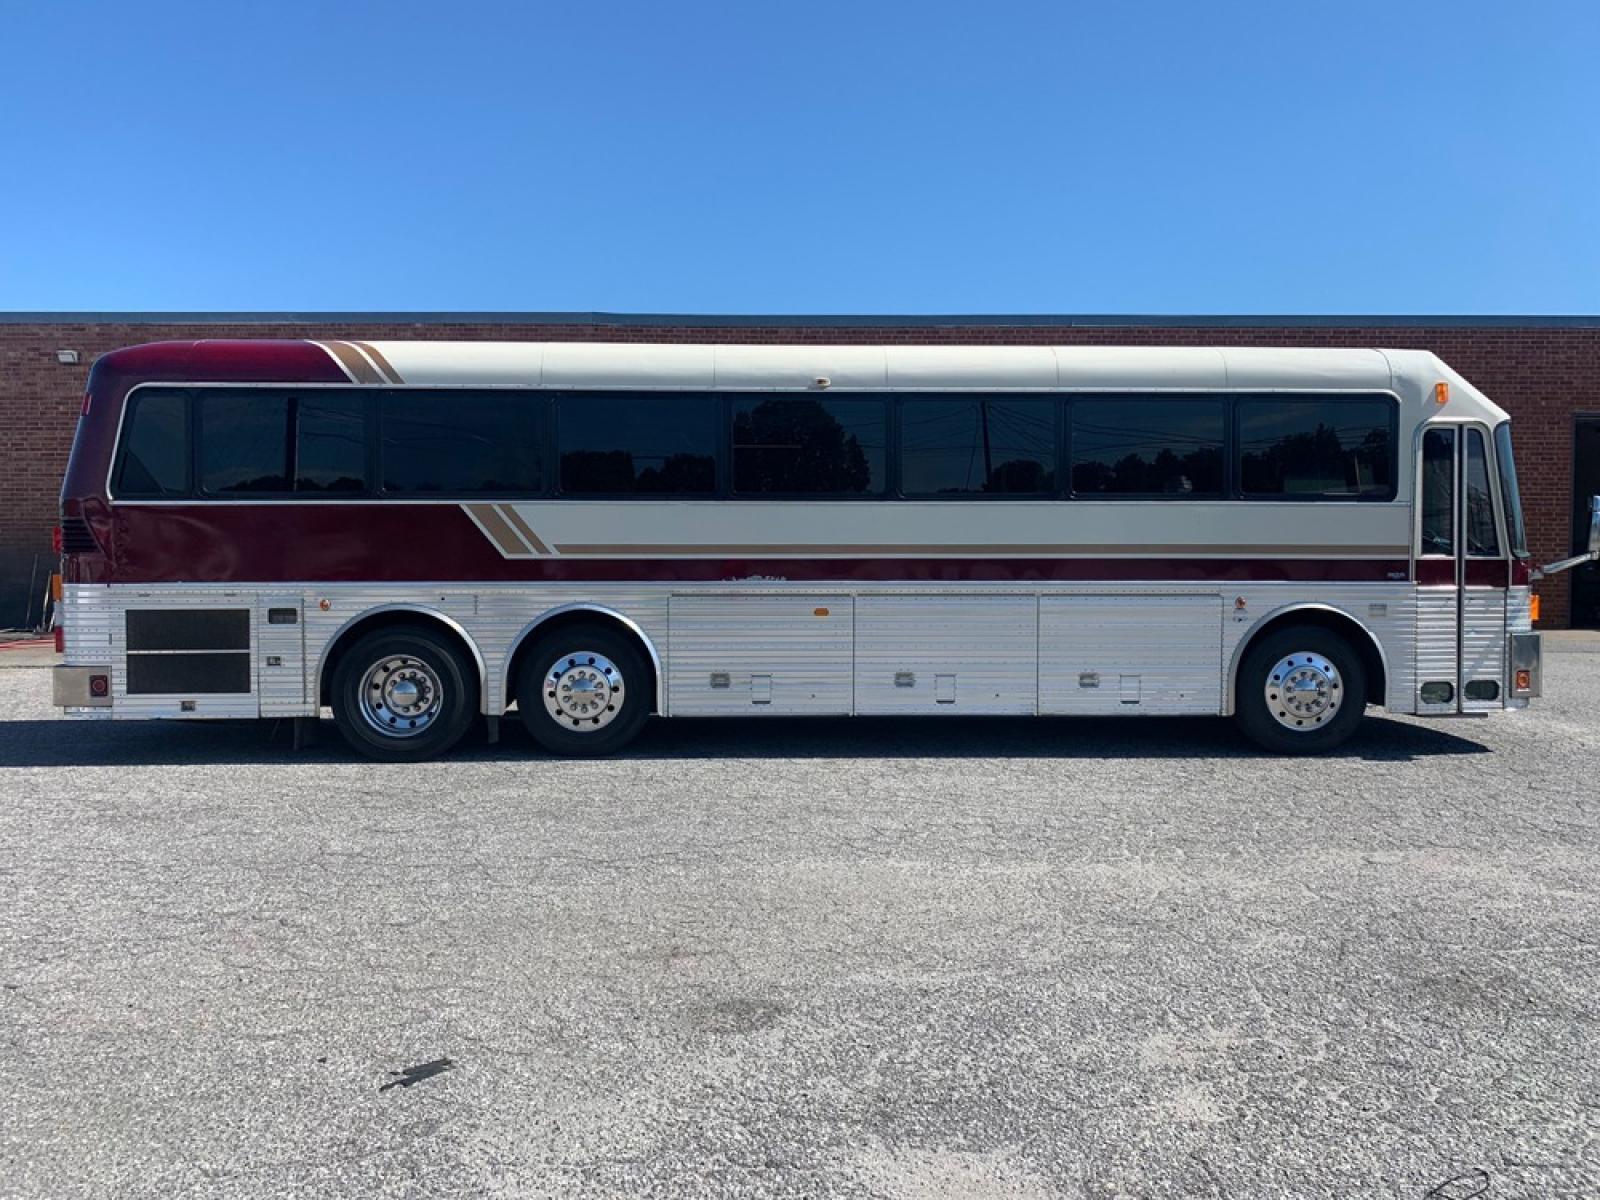 1996 White Eagle 15 Series with an Detroit Diesel Series 60 engine, Allison transmission, 0.000000, 0.000000 - 1996 EAGLE 15 Series 40’- 60 Detroit Diesel Engine, - Allison Automatic Transmission - 46 Passengers - Electric Wipers - Electric Mirrors - Alloy Wheels - 4 Monitors & DVD - Enclosed Overhead Racks – Restroom - Photo #2